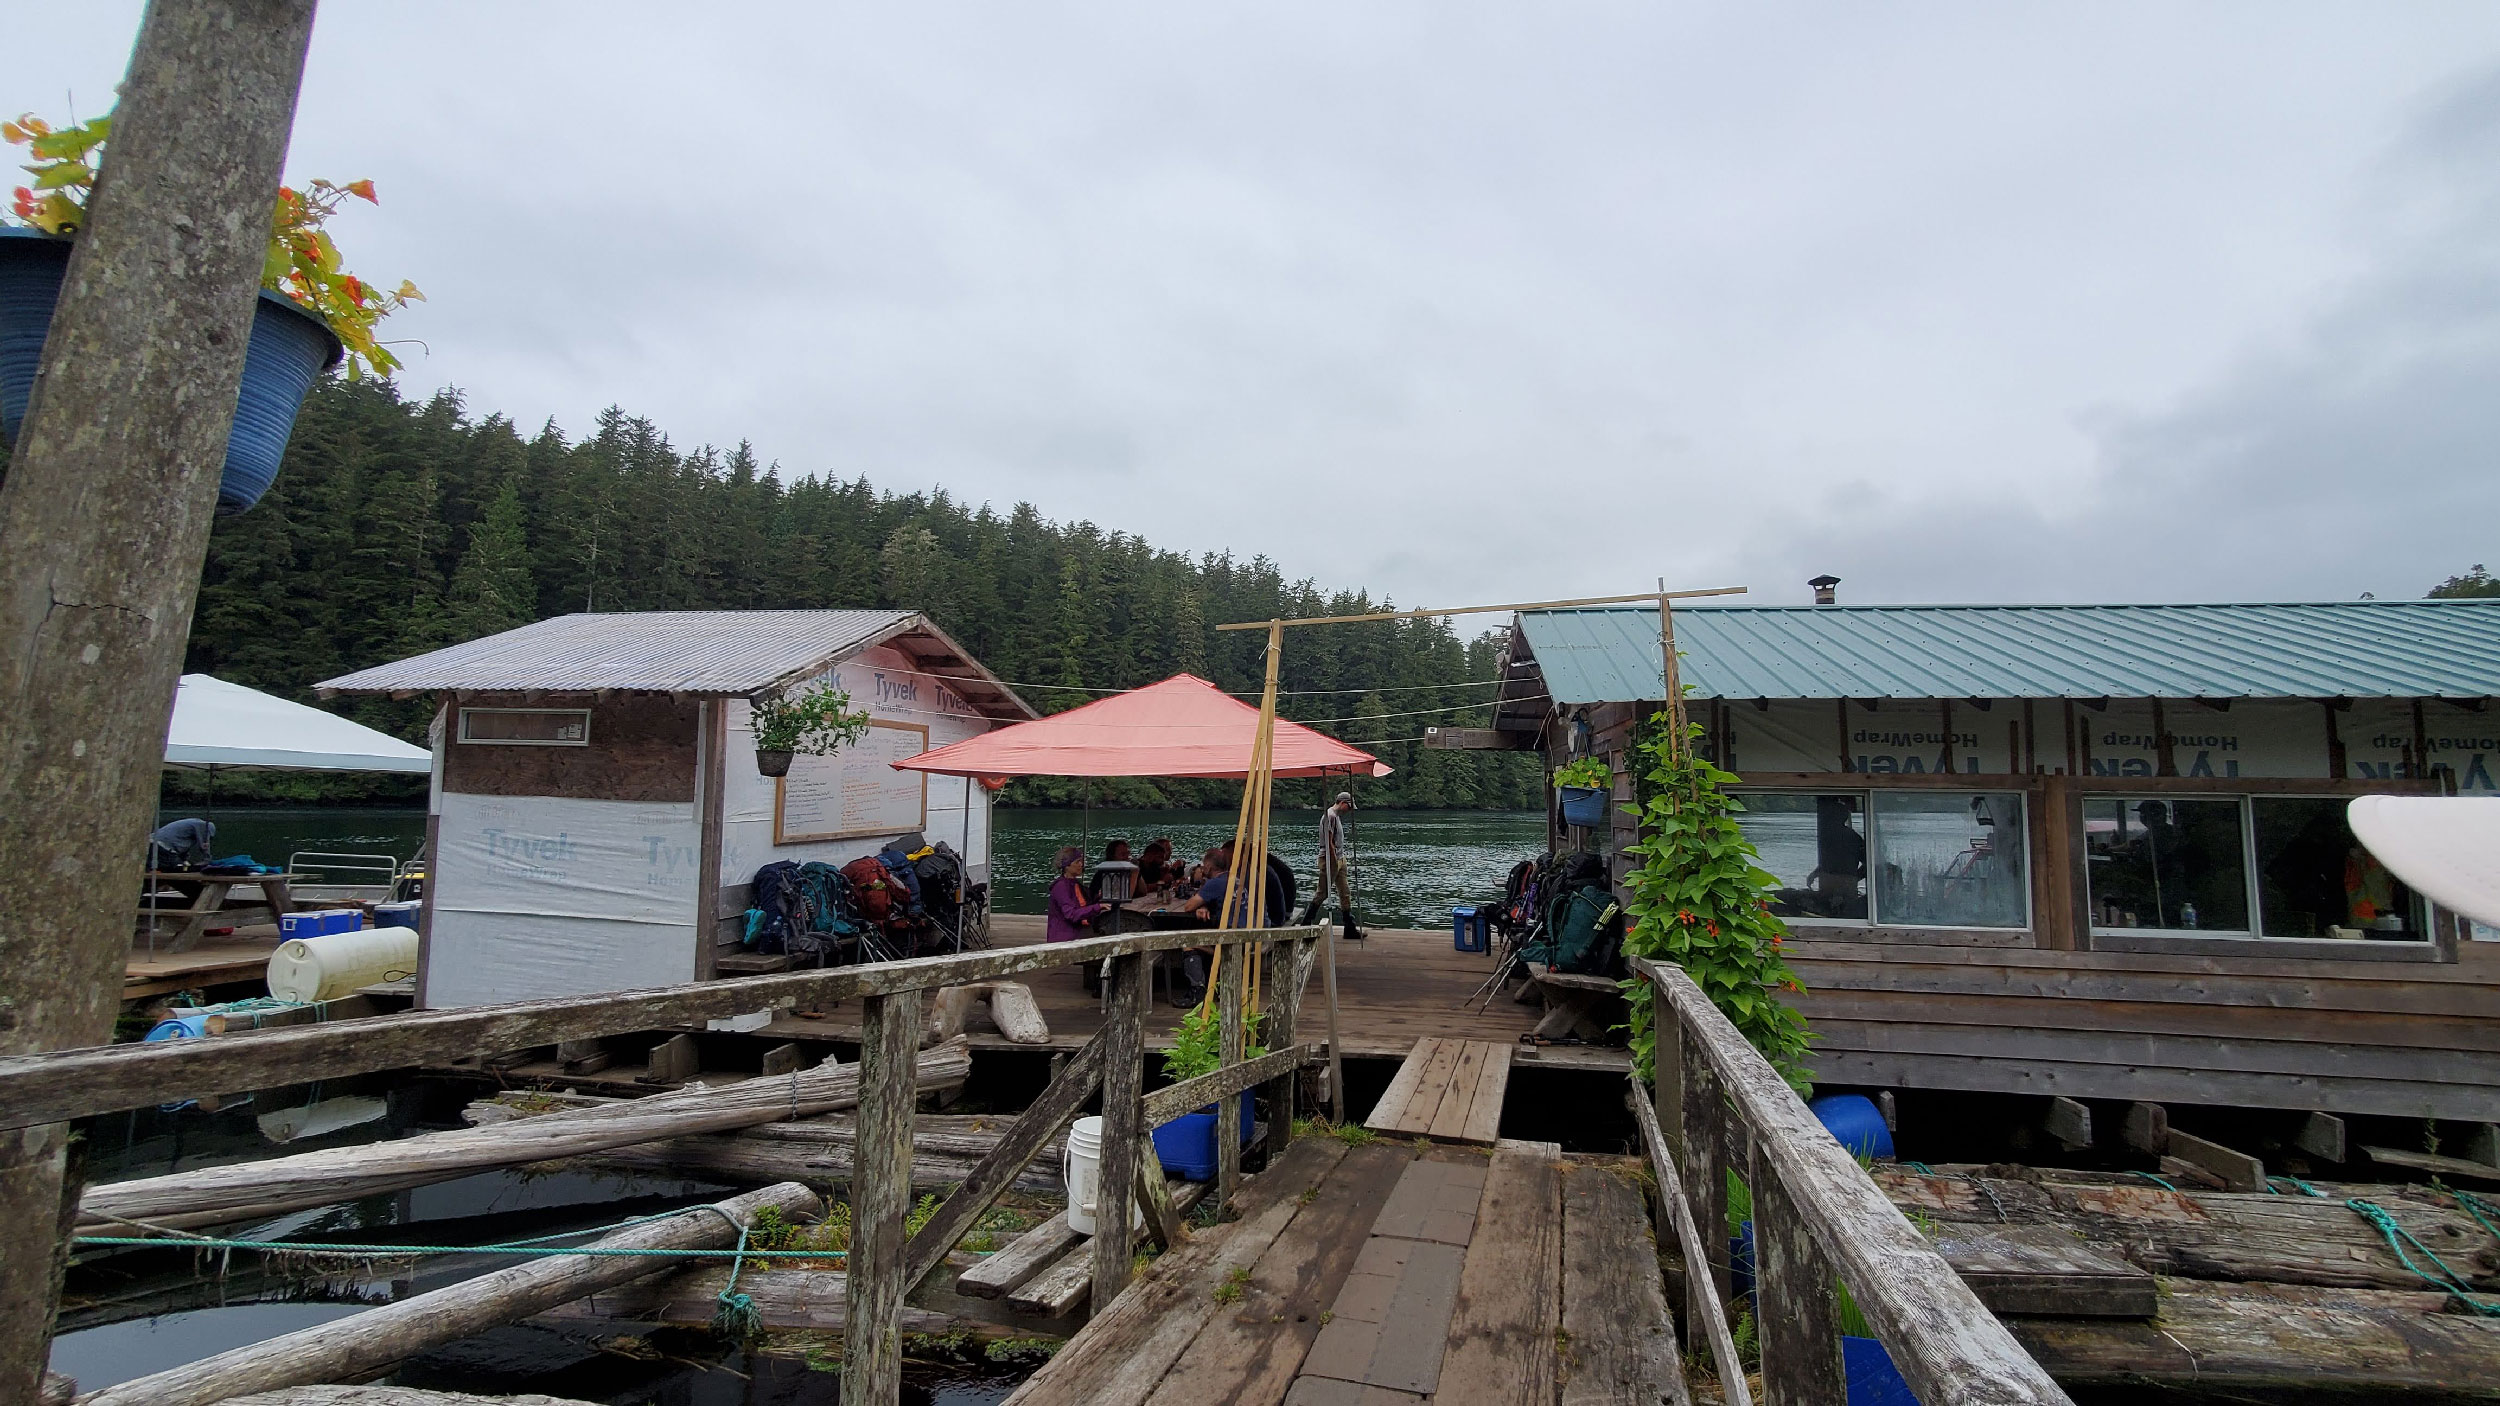 The Crab Shack, where Carl Edgar, his wife Shelley and his family have been serving hikers fresh fish and crab for 23 years.